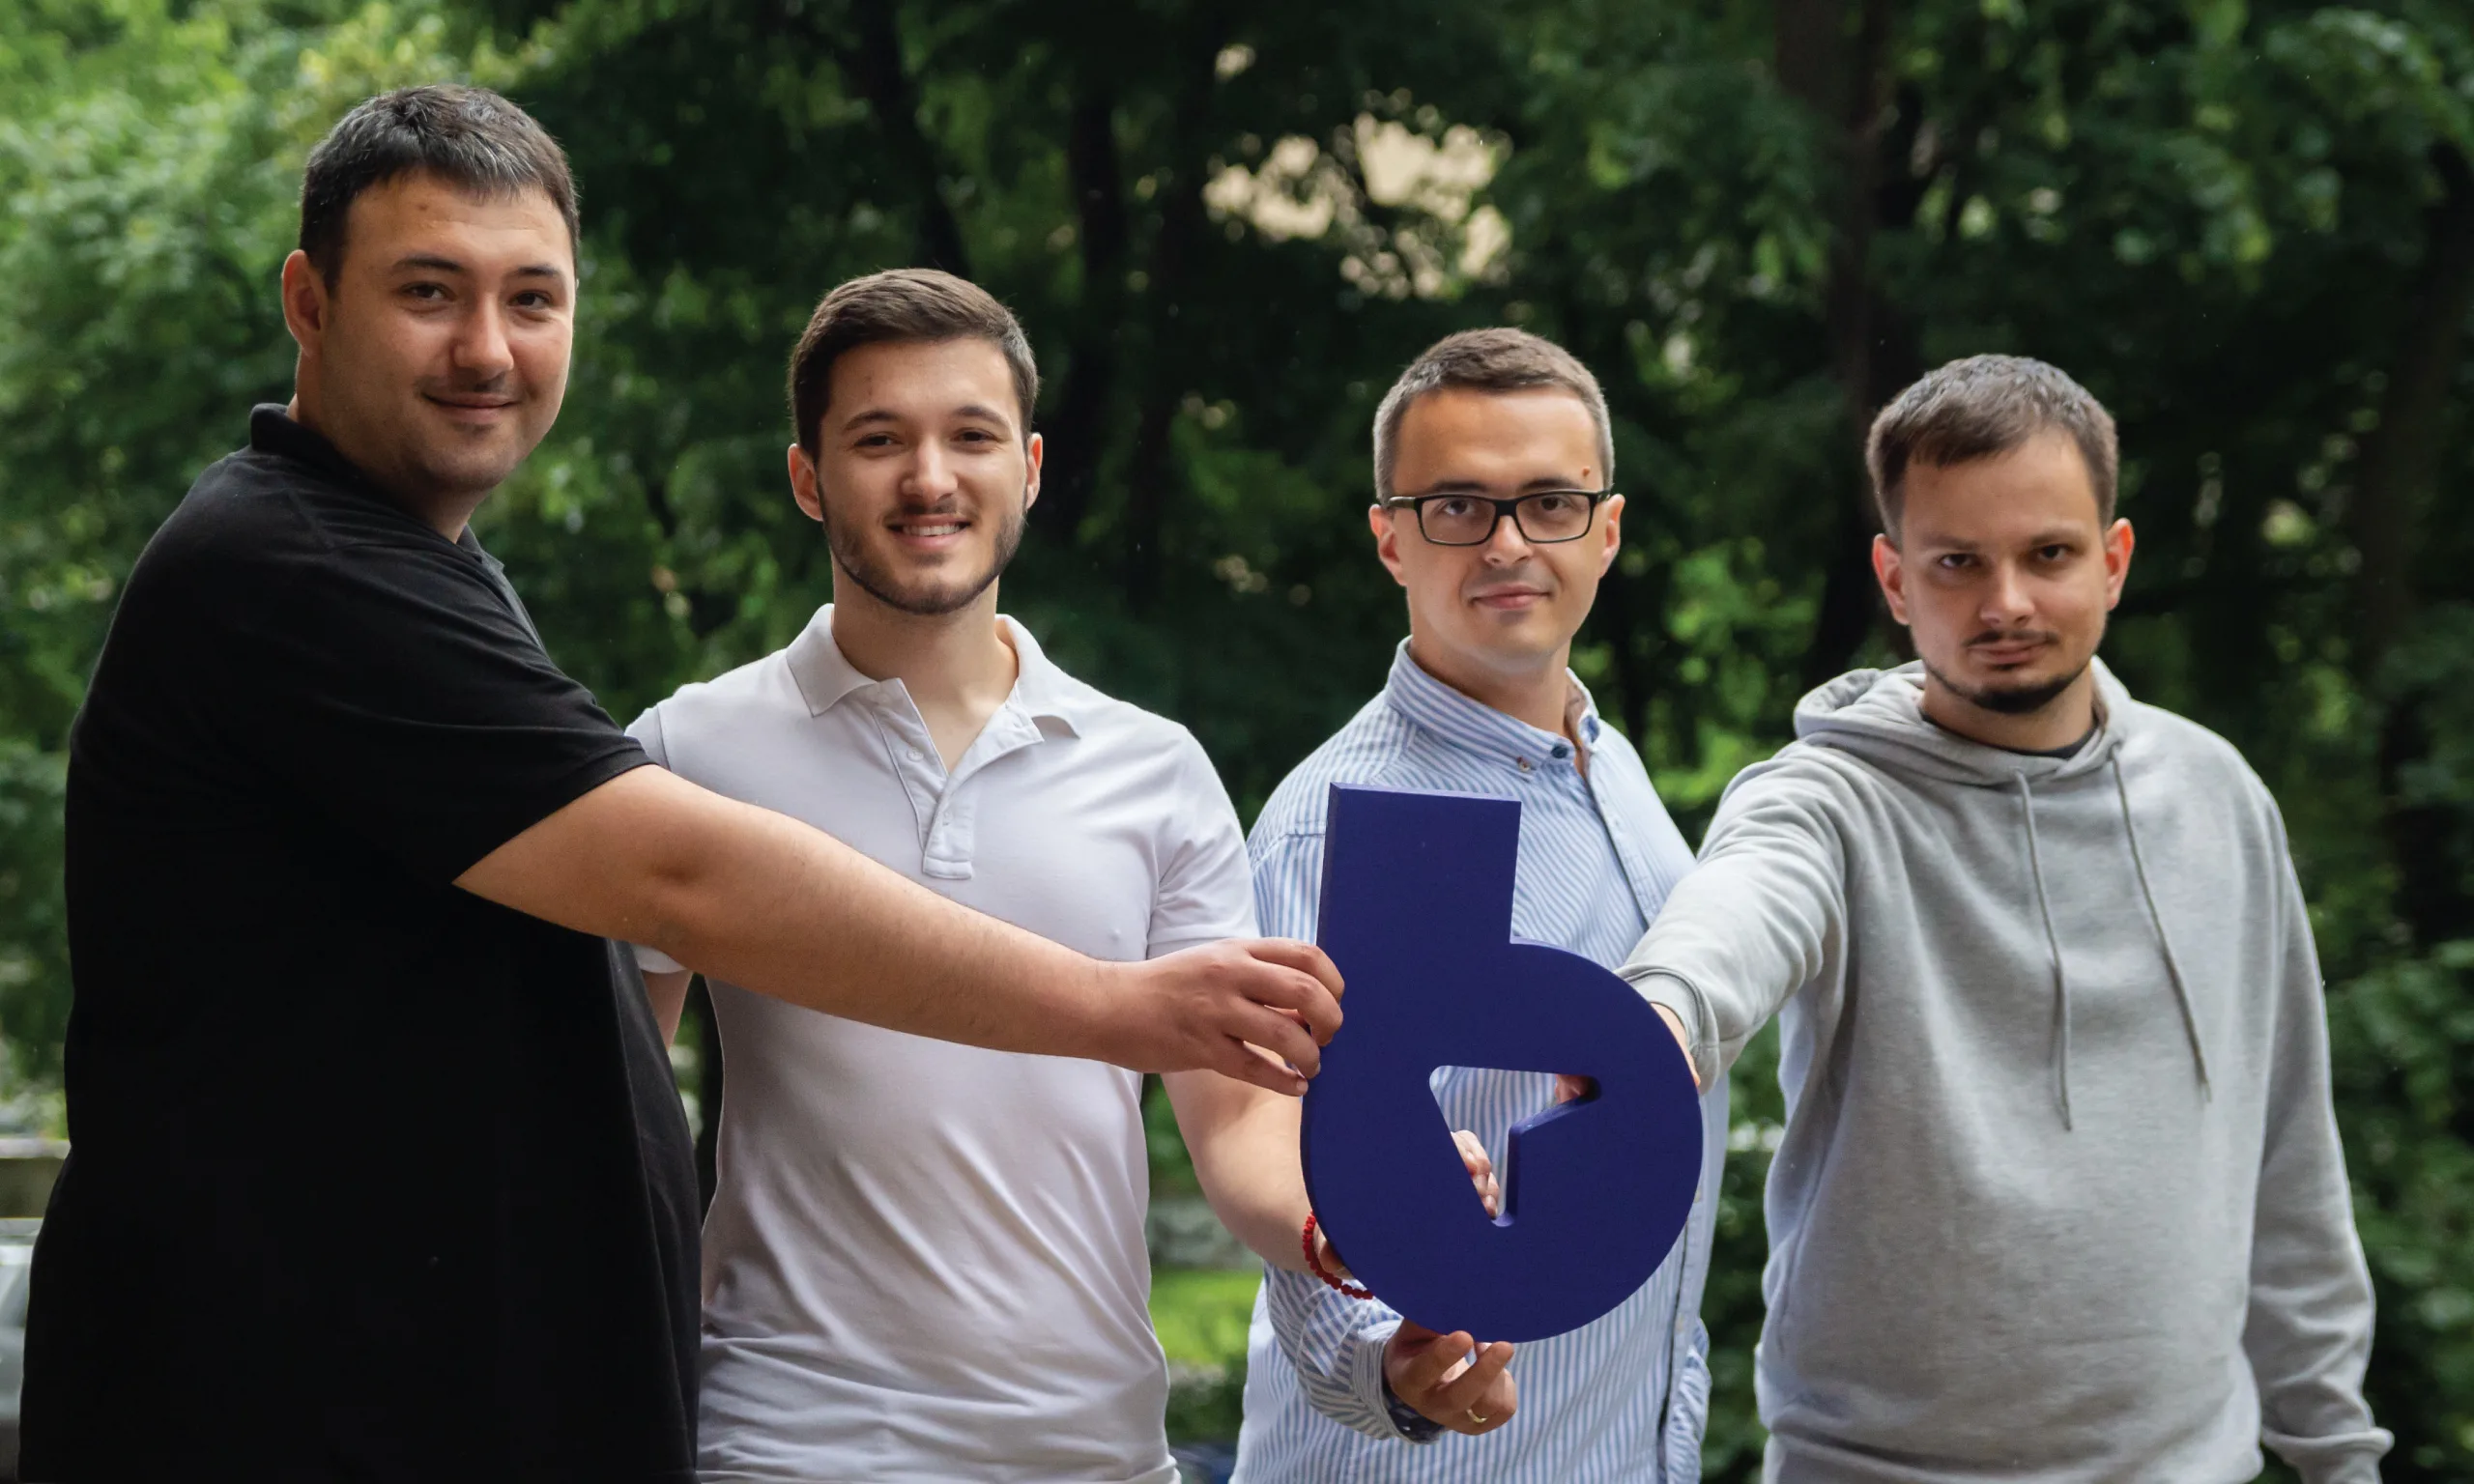 A team of four young mean holding a carboard logo in the park.